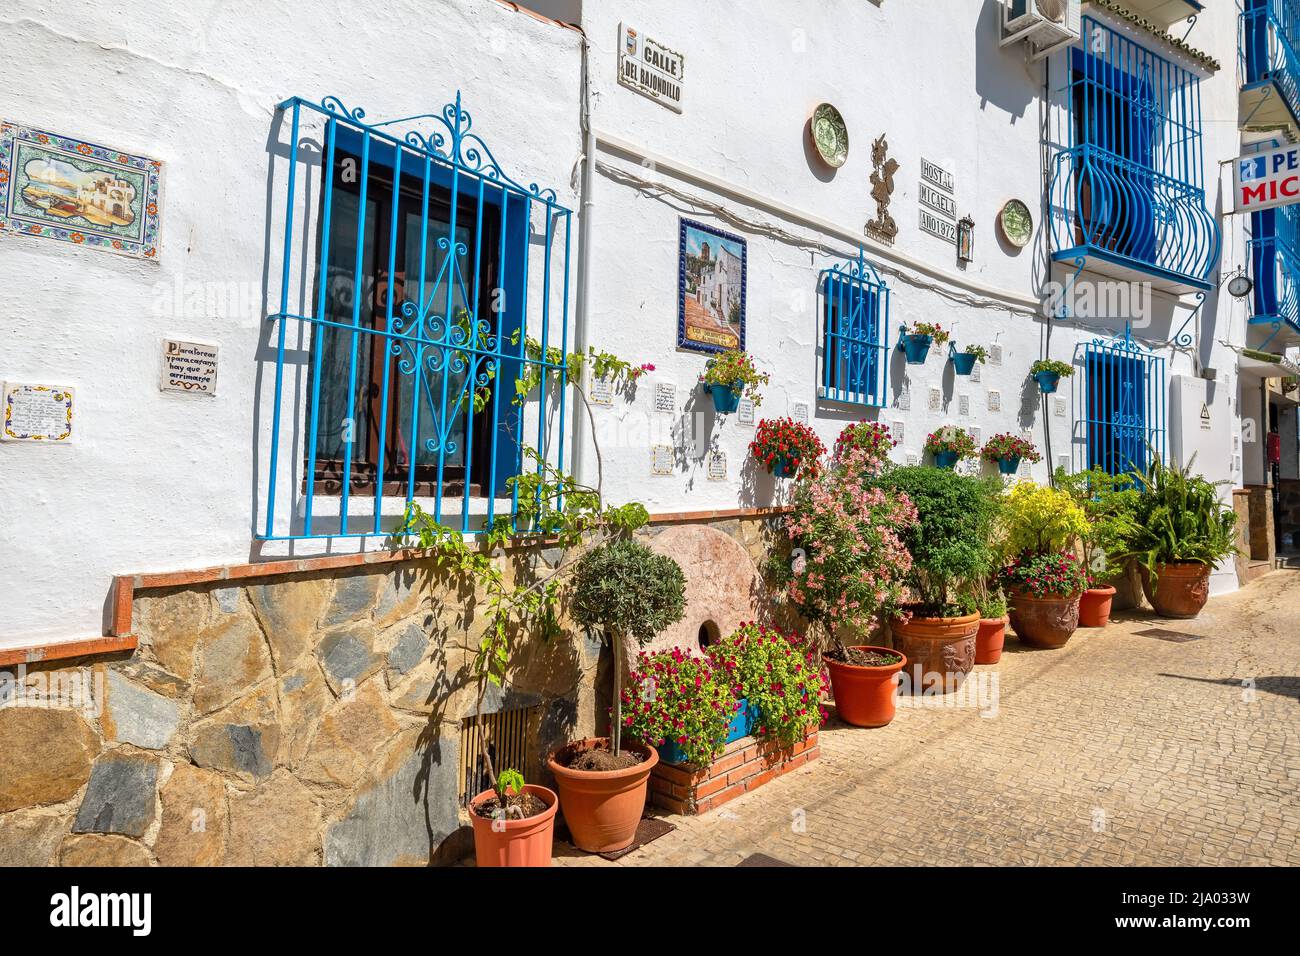 View to typical pedestrian street with picturesque facades in Torremolinos. Andalusia, Spain Stock Photo